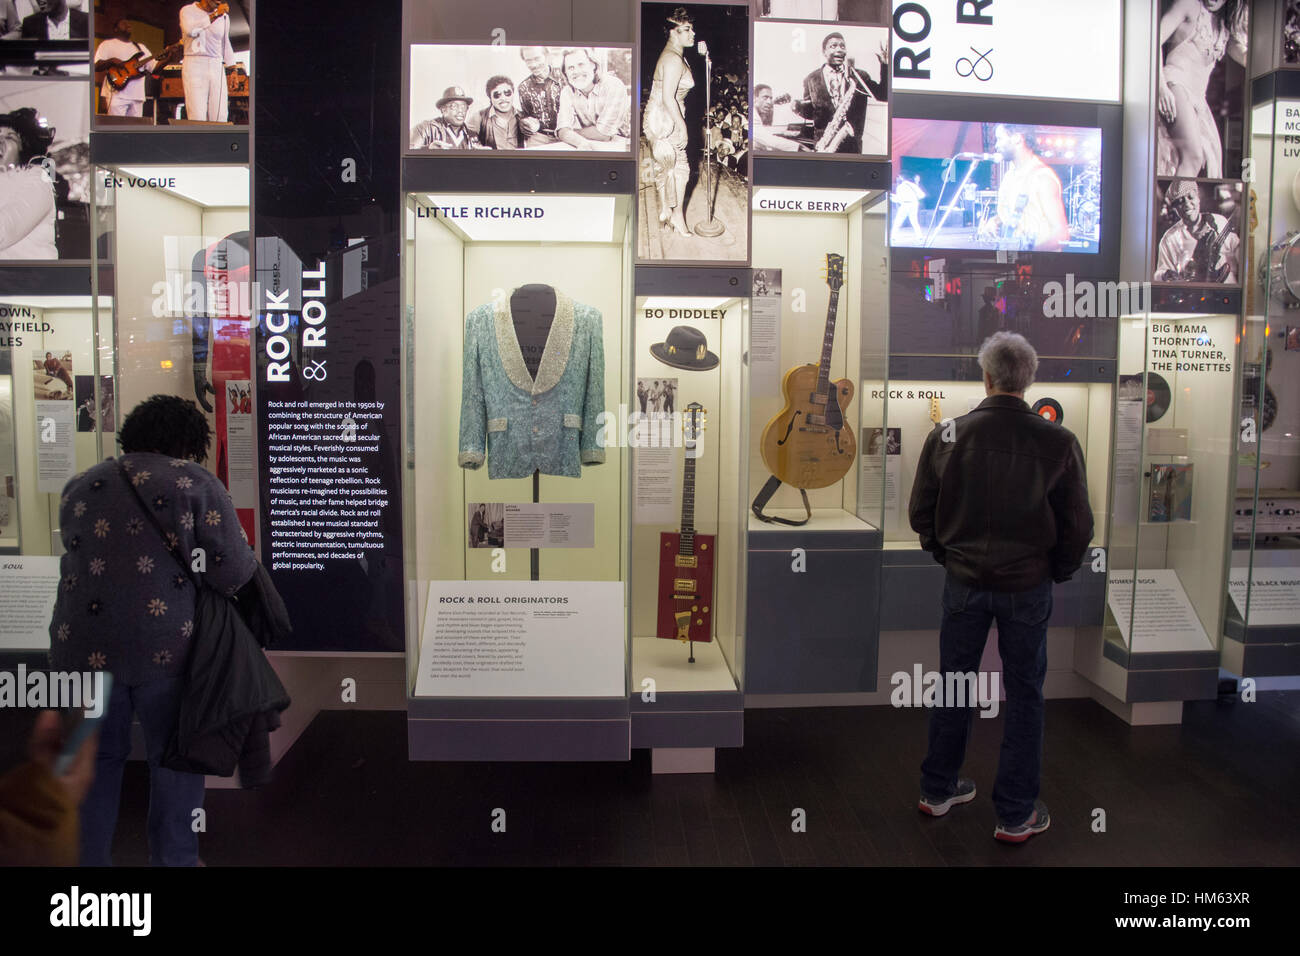 Objets appartenant à des initiateurs du Rock and Roll LIttle Richard, Bo, DiddleBerry le National Museum of African American History and Culture, Washingt Banque D'Images